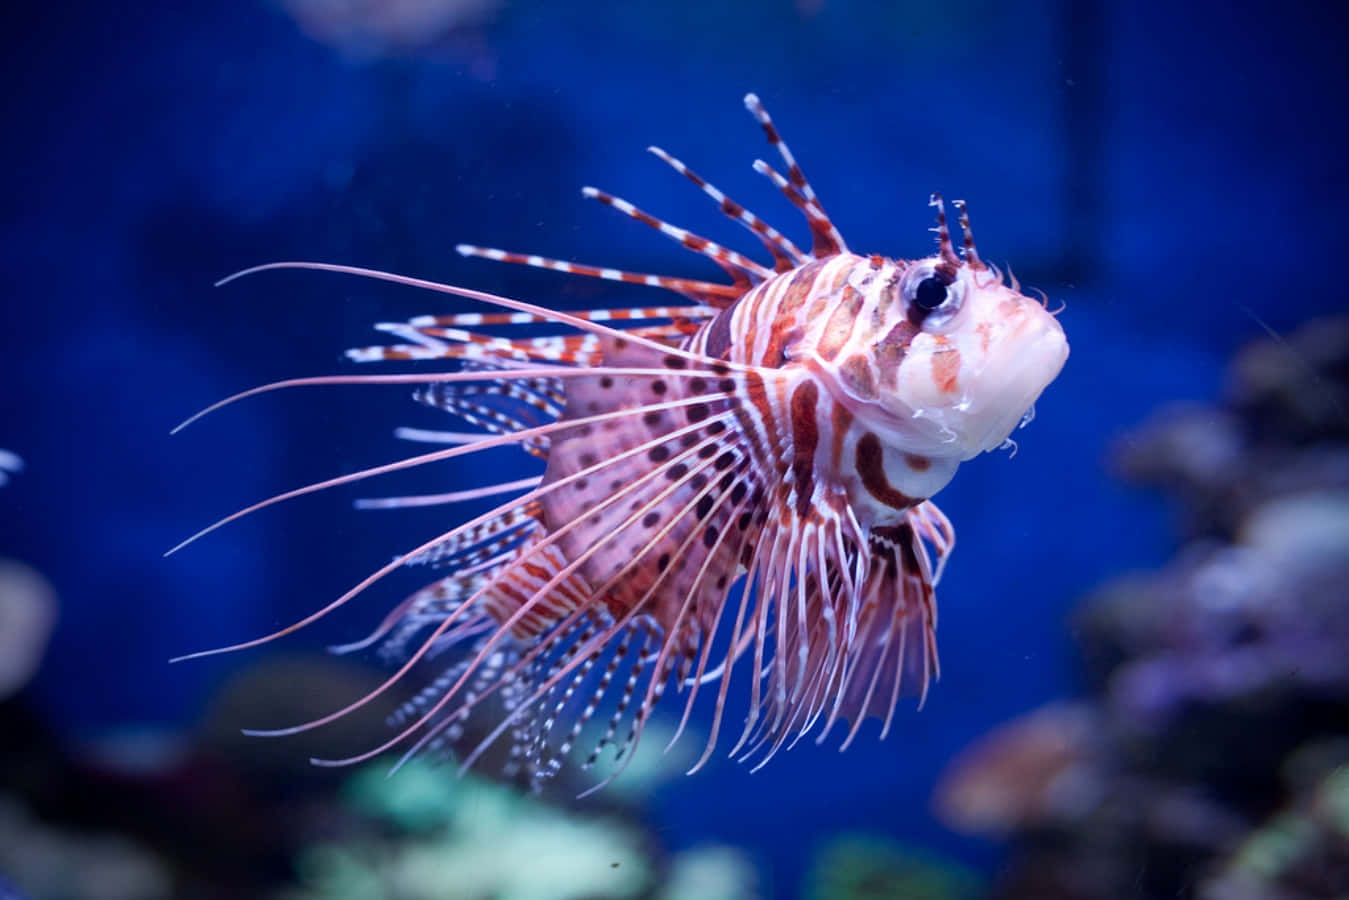 Lionfish In An Aquarium With Blue Water